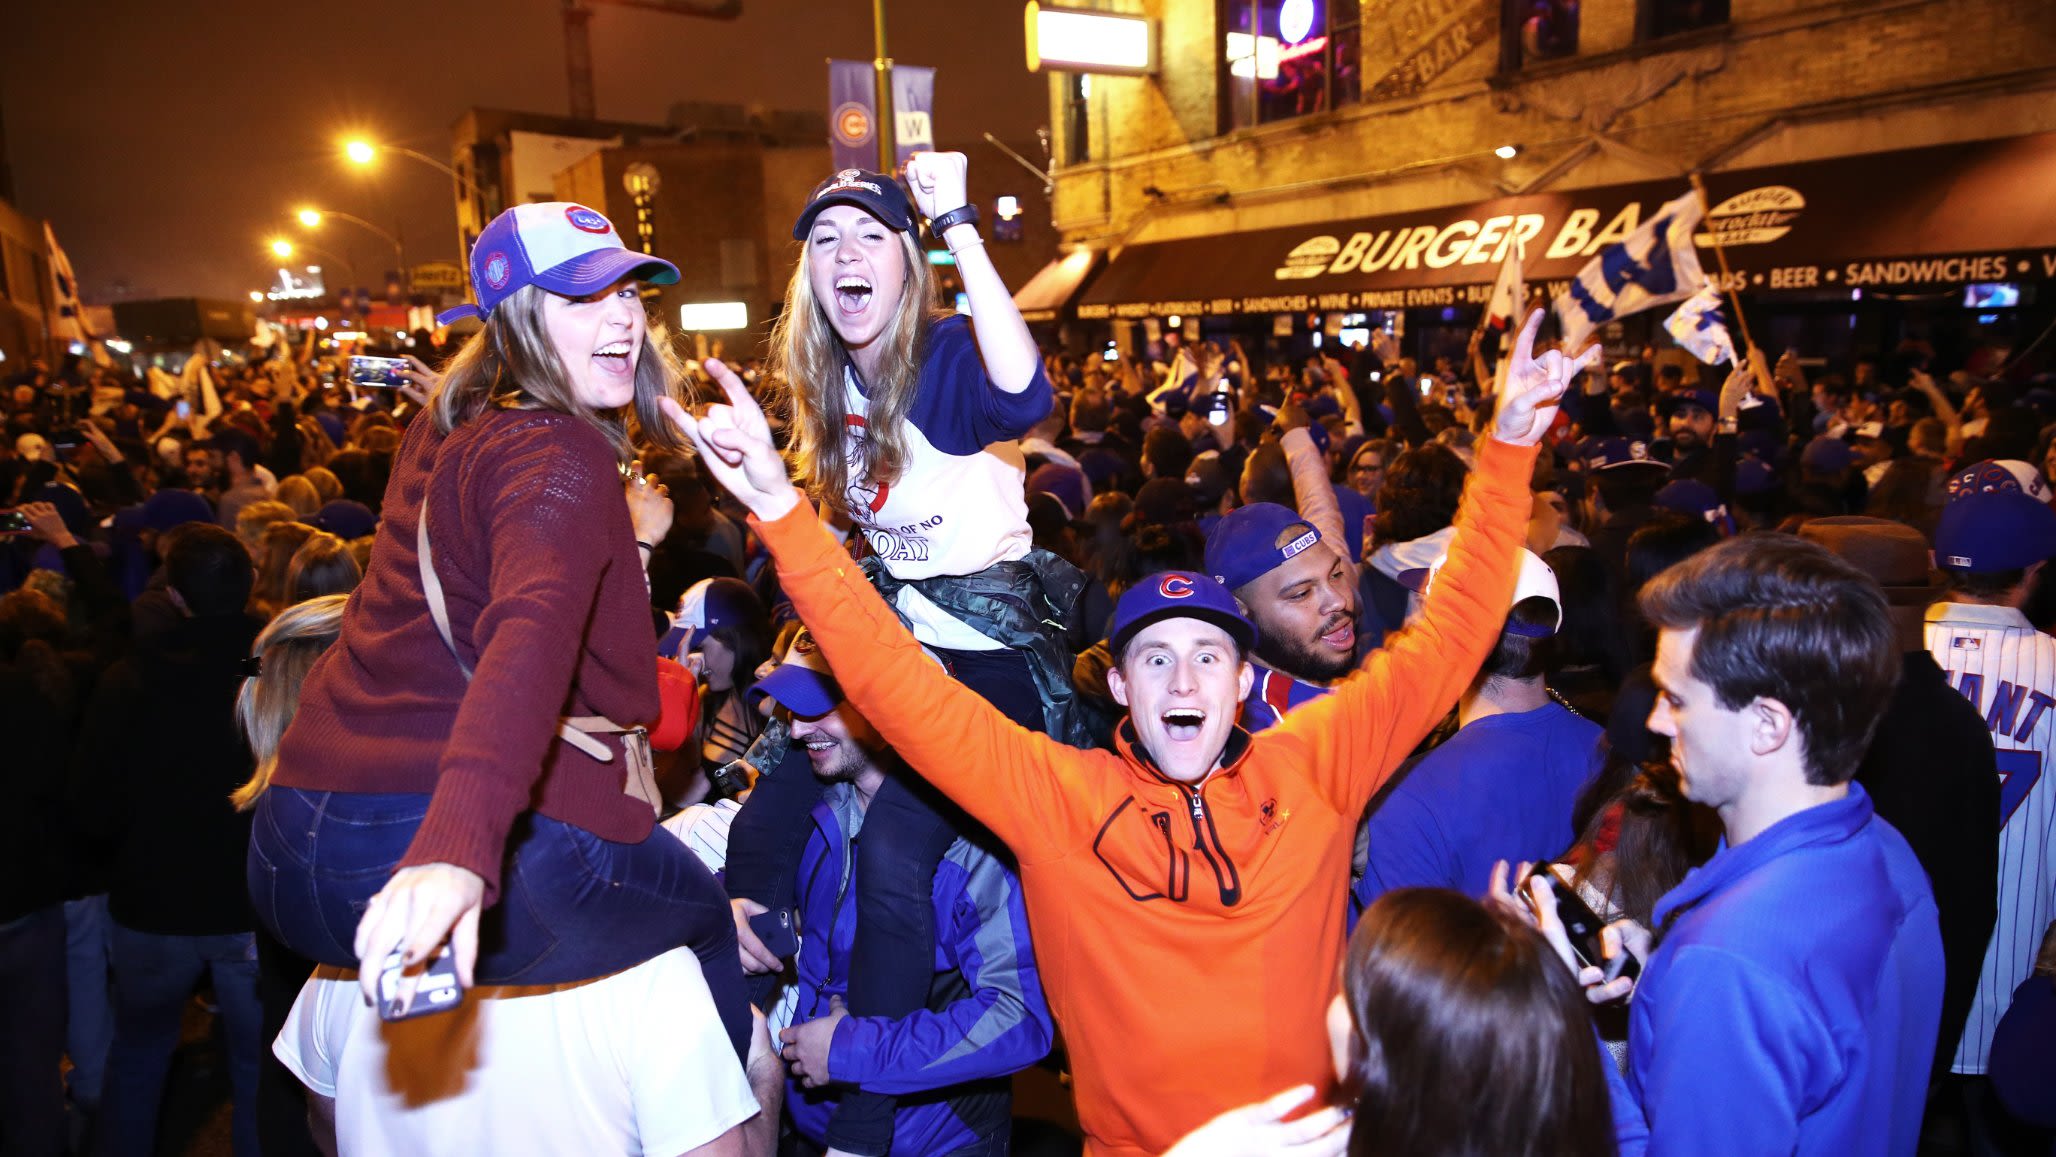 4 Weird Cubs Items to Celebrate Their World Series Win